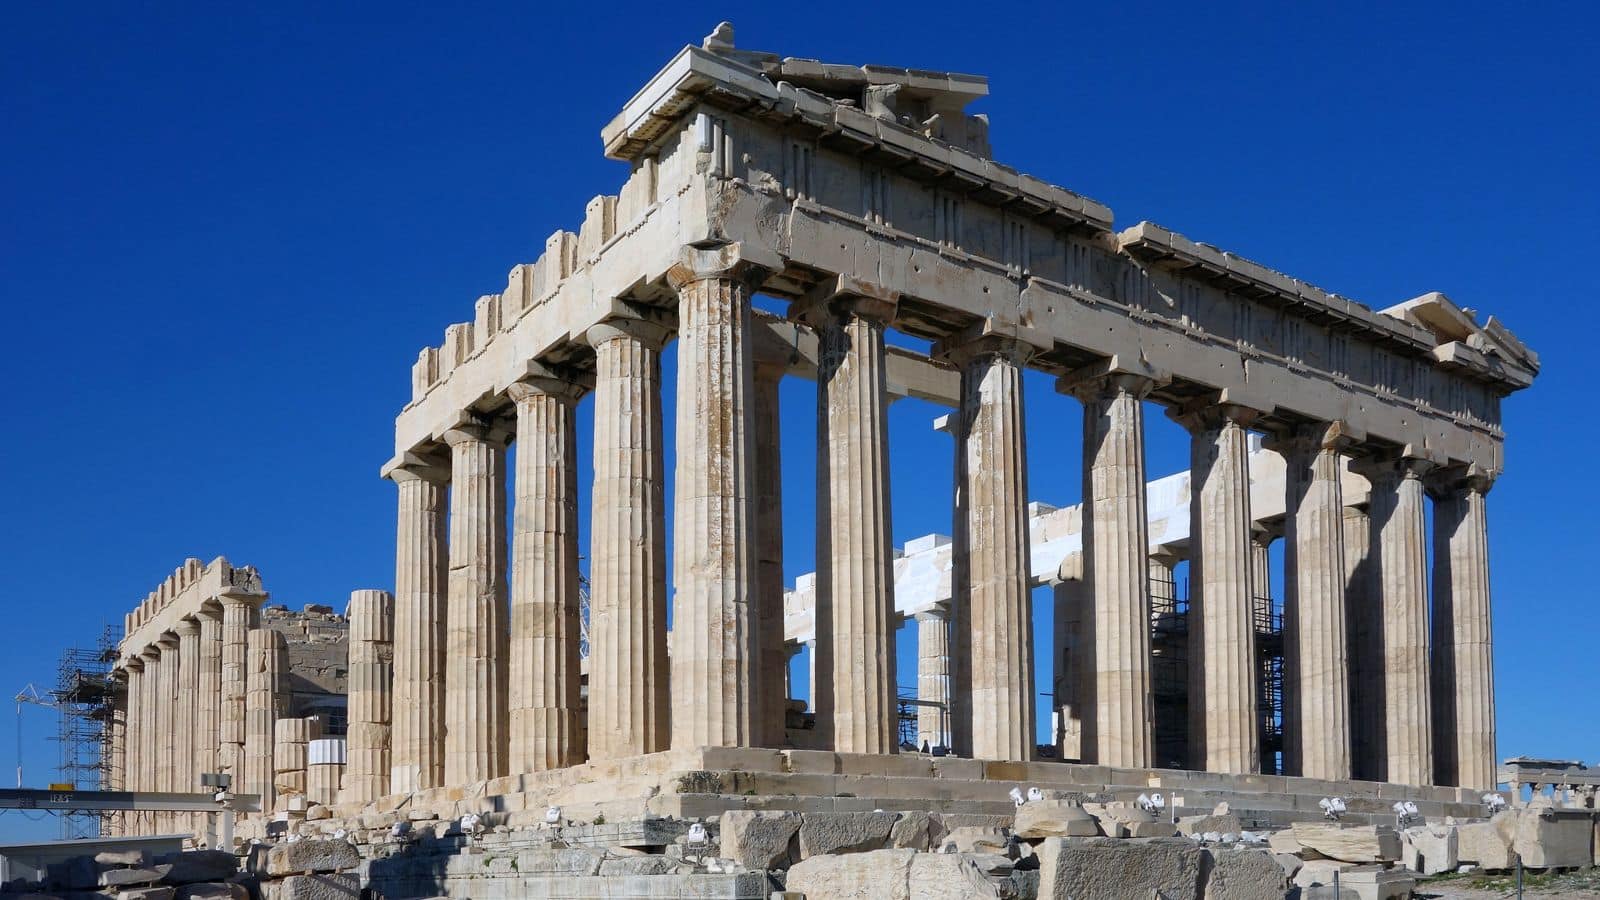 Acropolis in Athens: Take a journey through antiquity